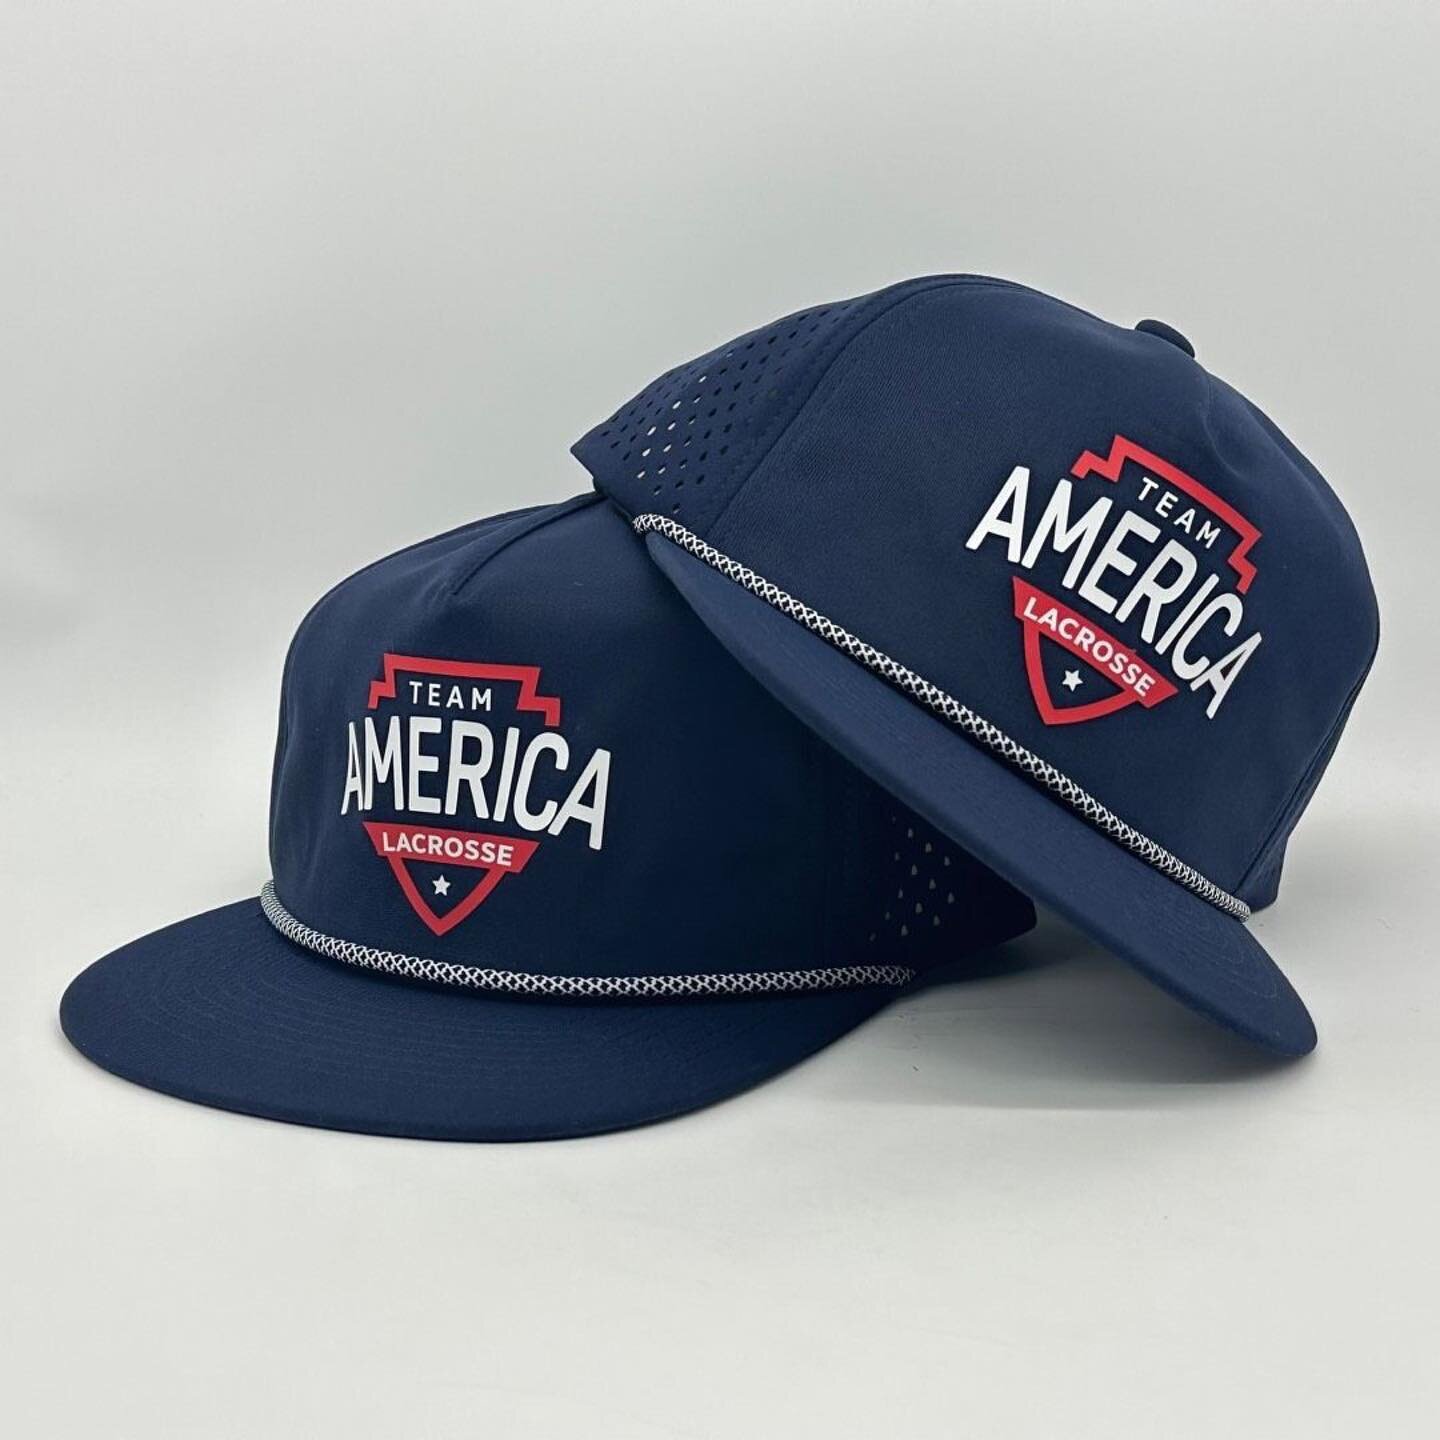 First merch drop &hellip; DM for some Team America Gear! Or track down Coach Bulken at Black Jack Dec 2-3

Blue - 40$

We had a factory misprint on the white and grey hats and are passing the savings on to you! -20$